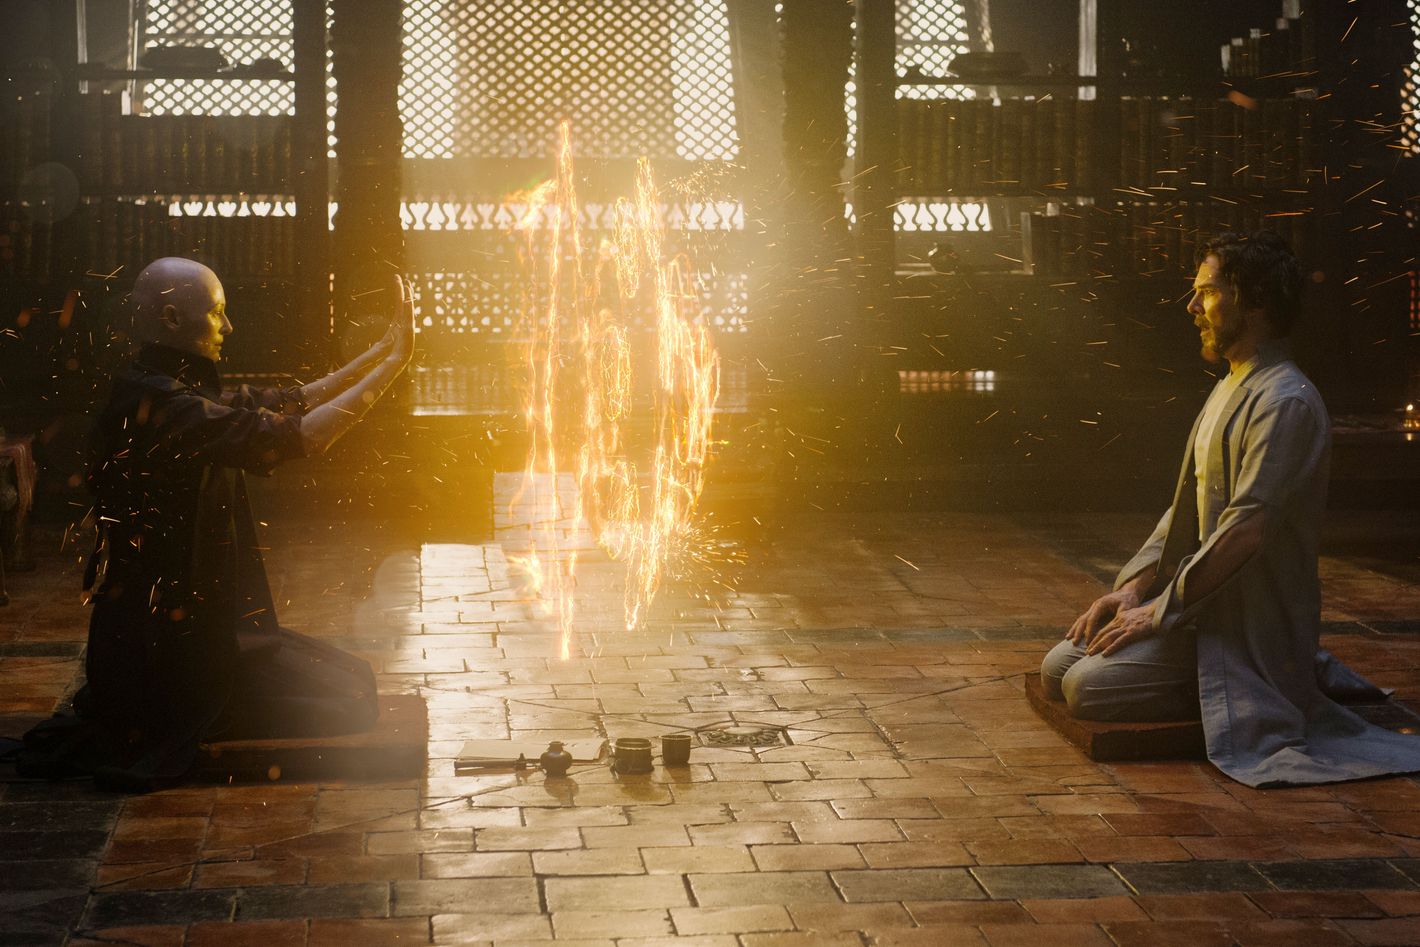 CGI Usage in Dr Strange: Multiverse of Madness